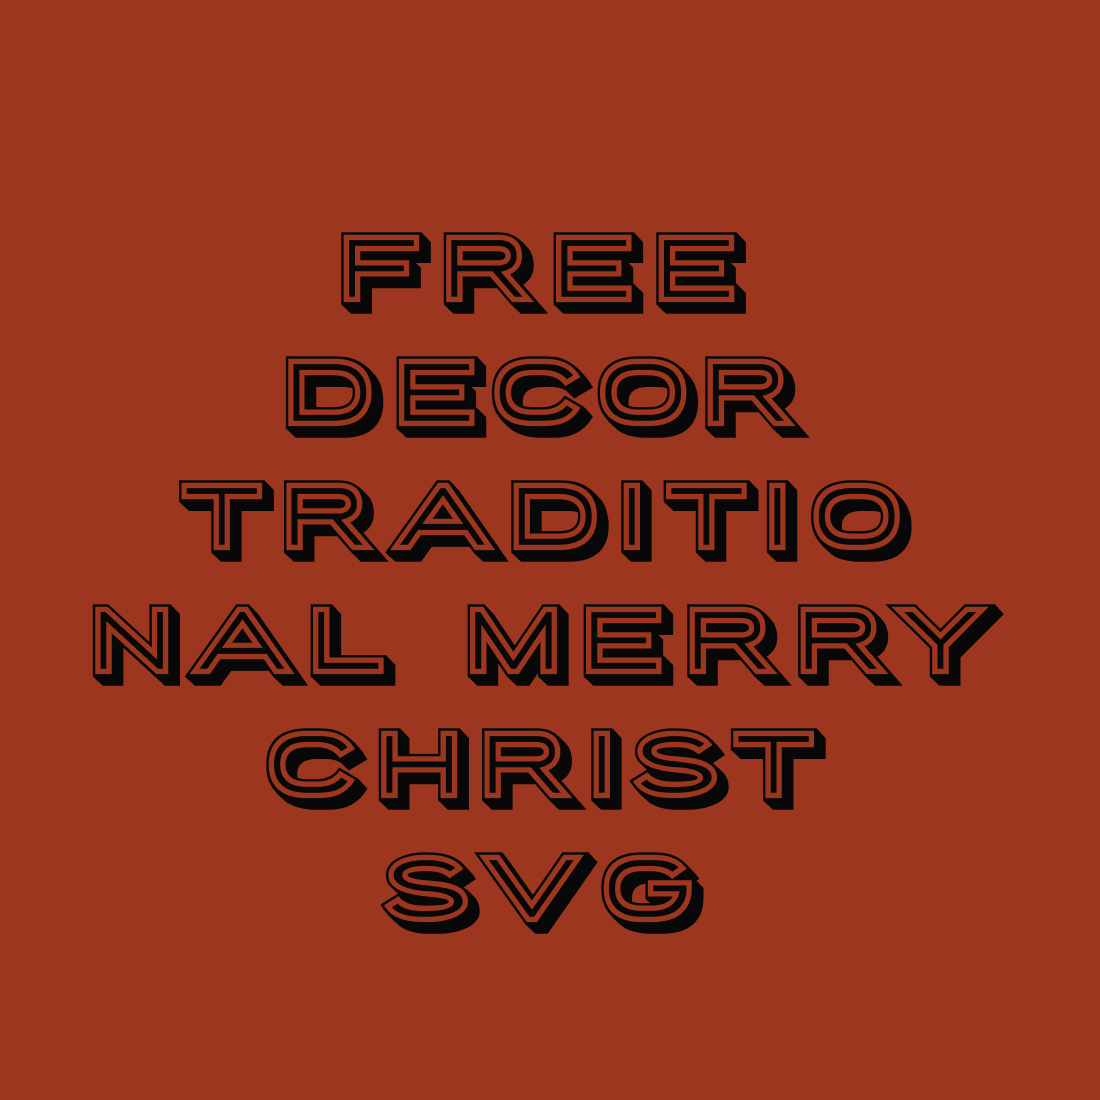 Free Decor Traditional Merry Christ SVG preview.